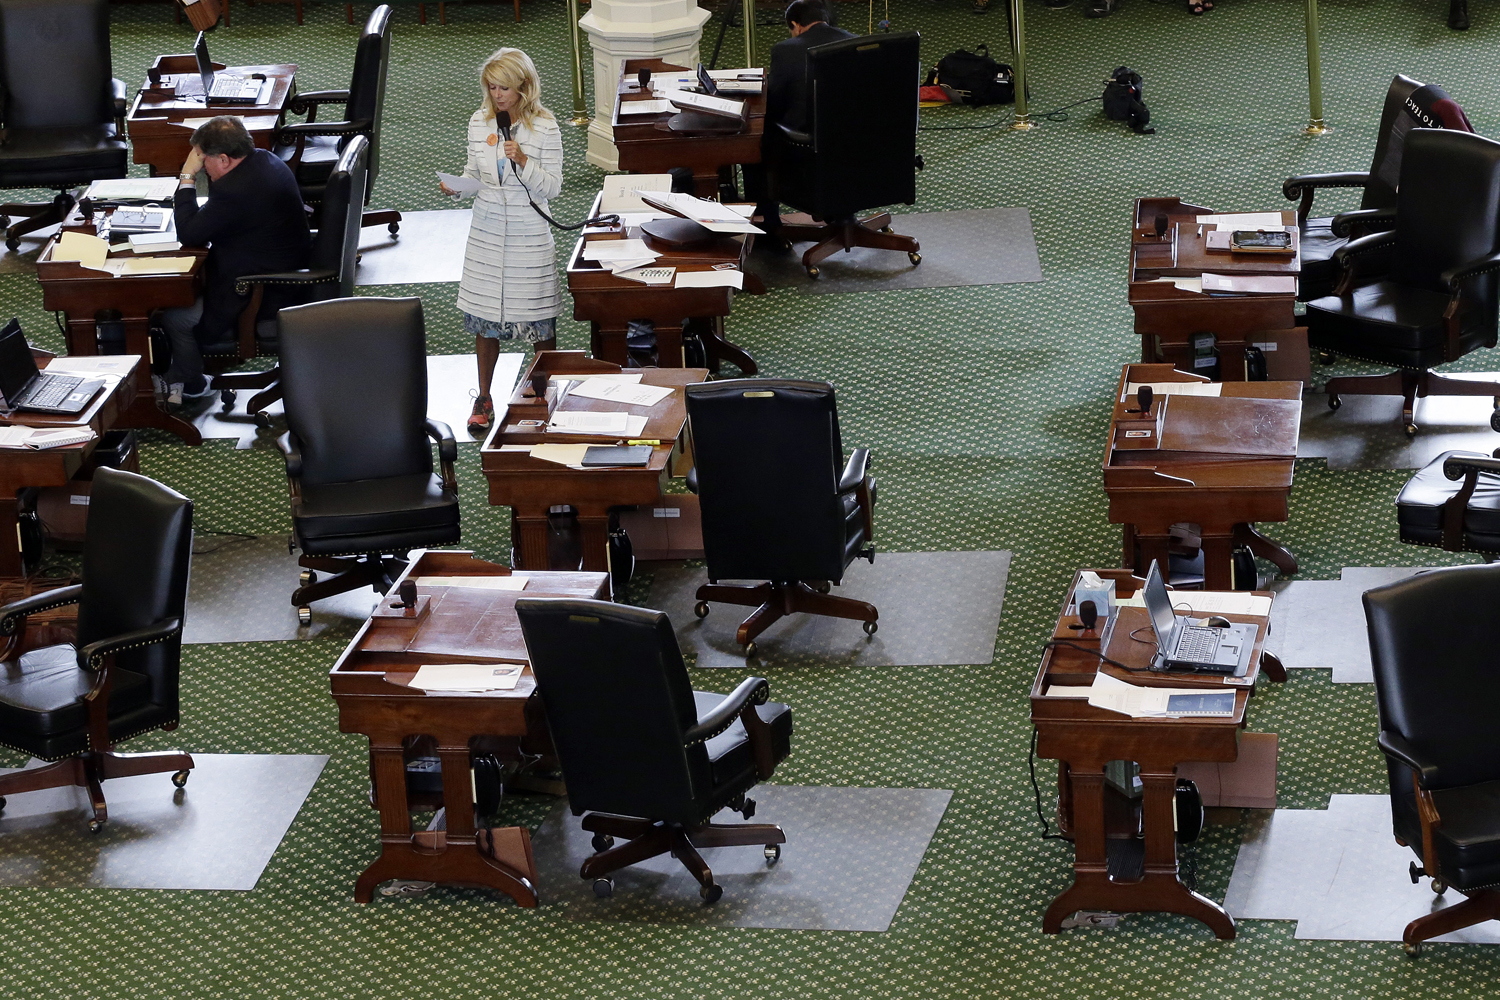 June 25, 2013. Sen. Wendy Davis, D-Fort Worth, stands on a near empty senate floor as she filibusters in an effort to kill an abortion bill in Austin, Texas.